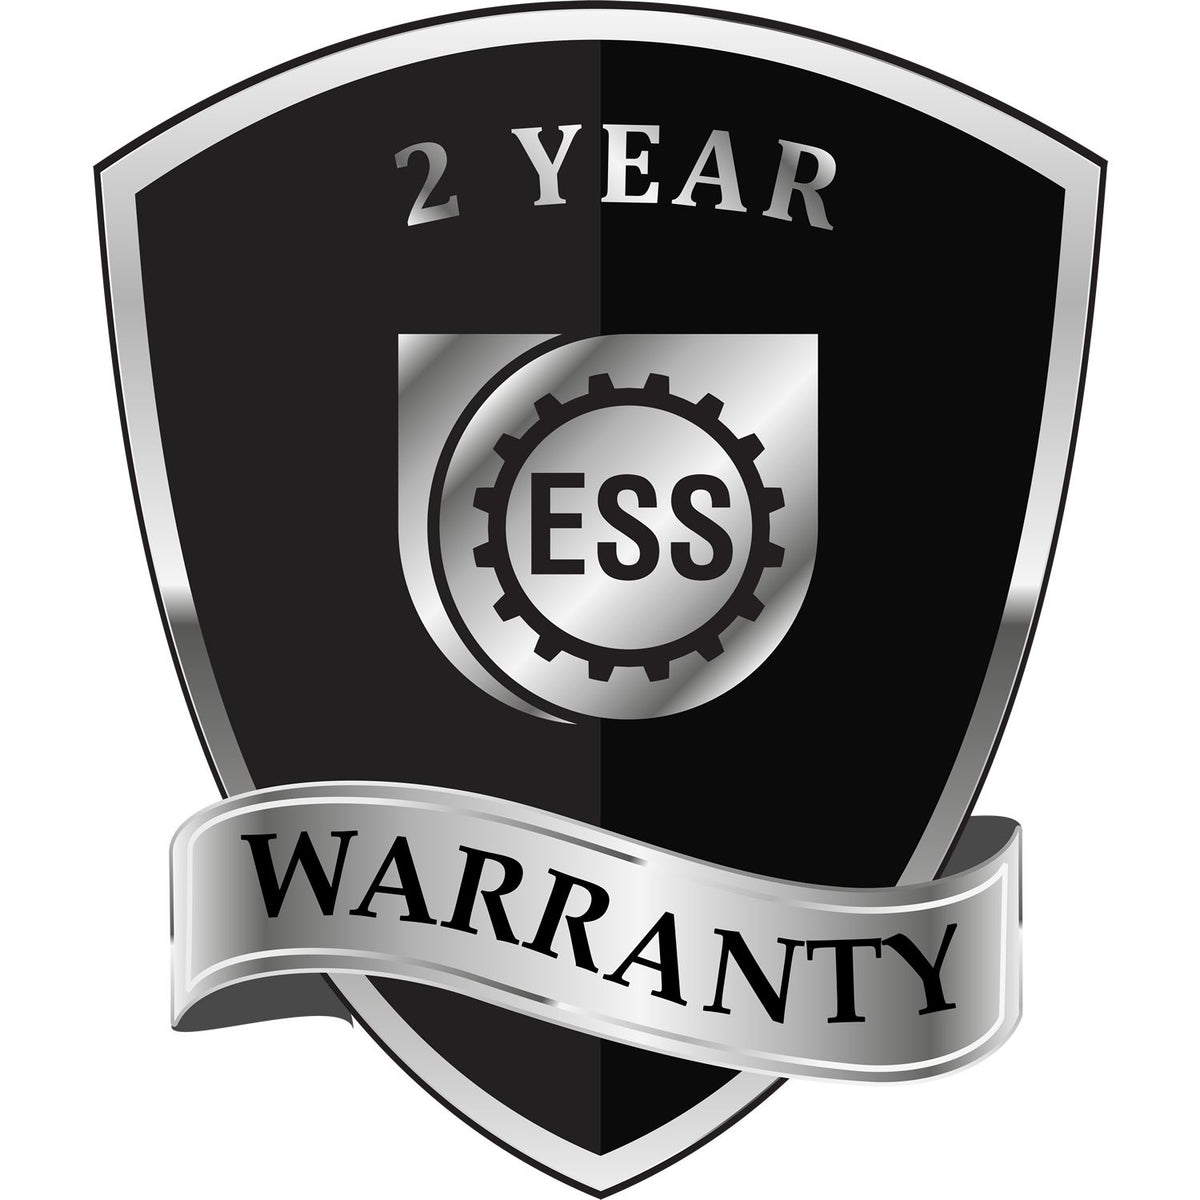 A badge or emblem showing a warranty icon for the Long Reach Indiana Land Surveyor Seal